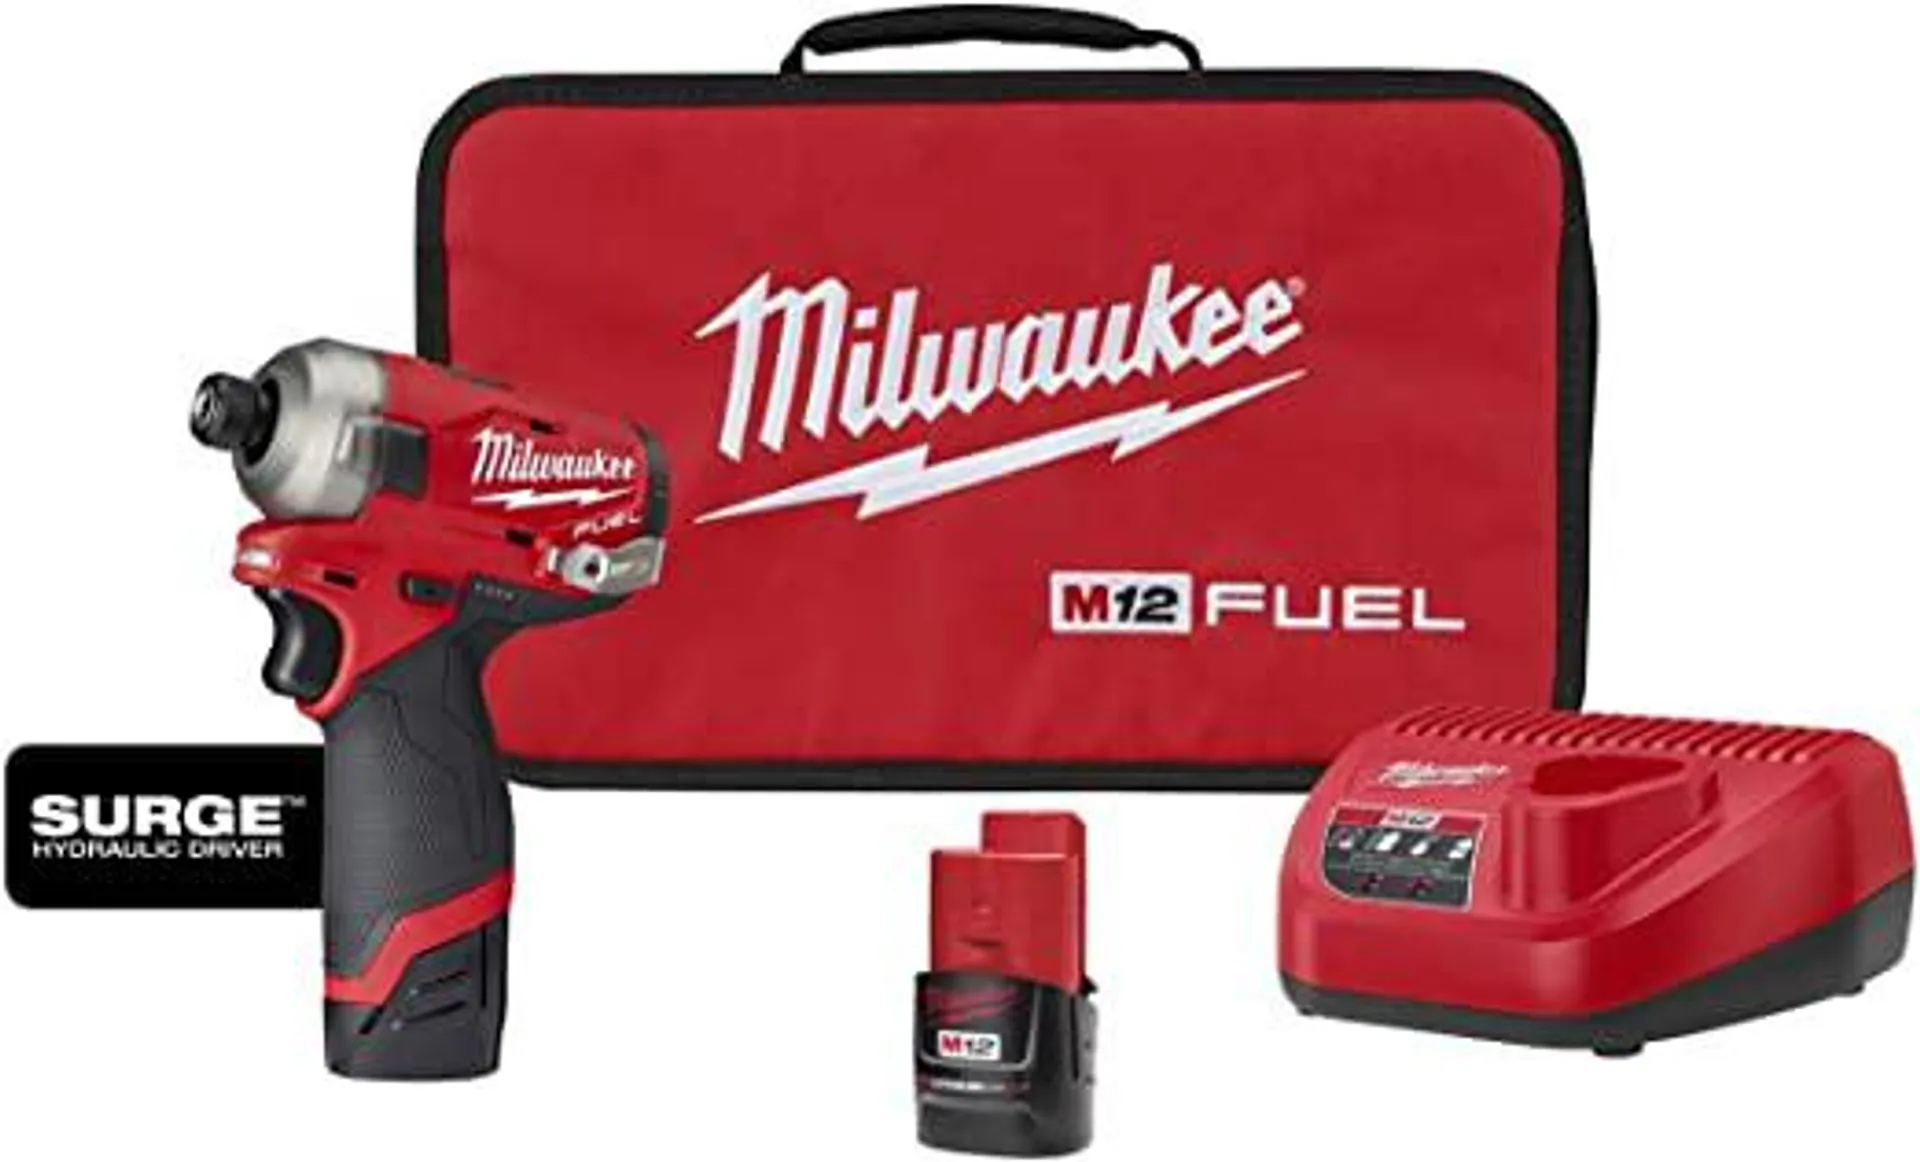 M12™ FUEL™ SURGE™ 1/4 in. Hex Hydraulic Driver 2 Battery Kit